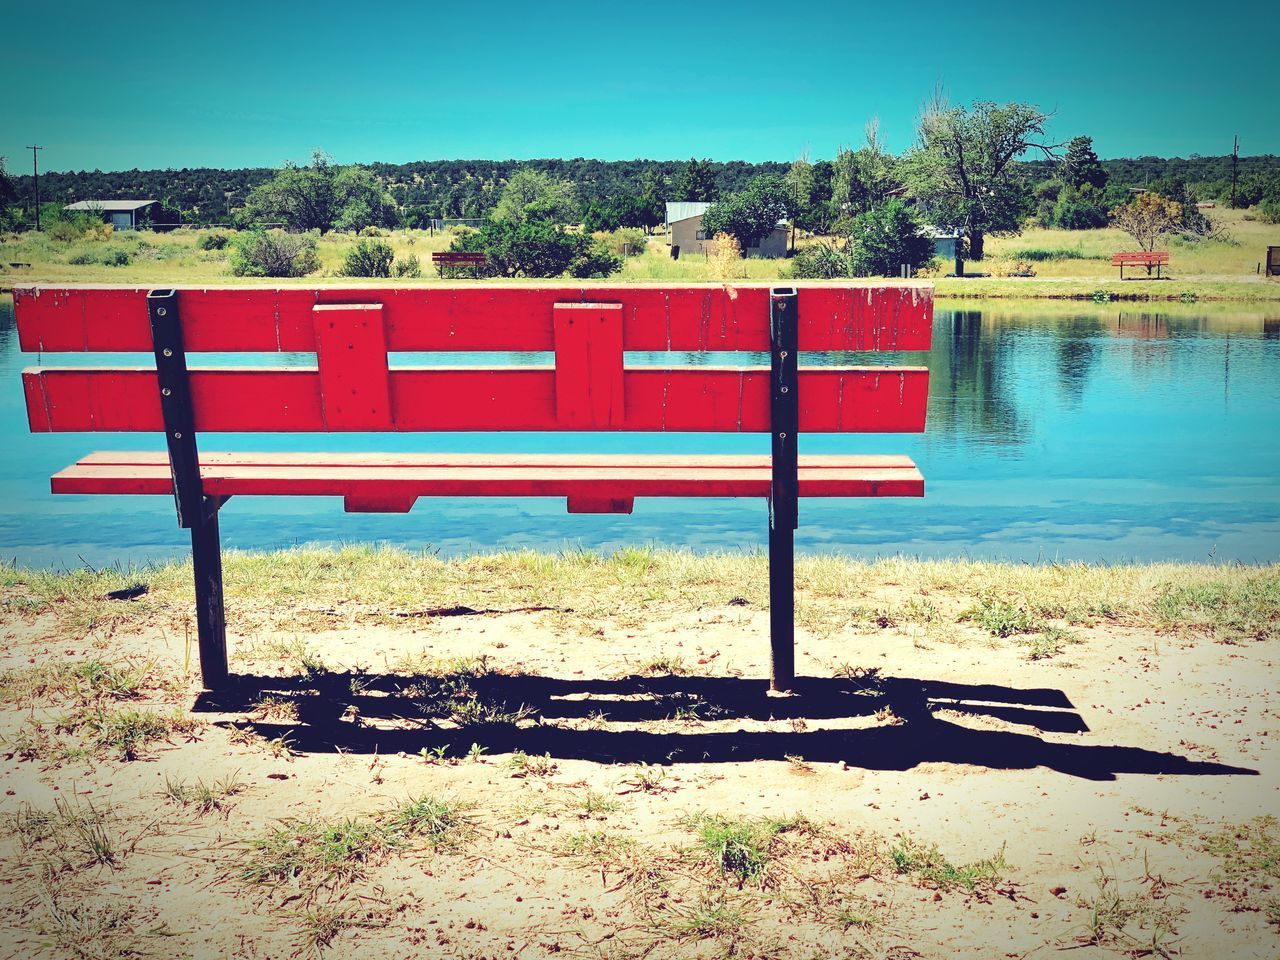 BENCH BY LAKE AGAINST SKY